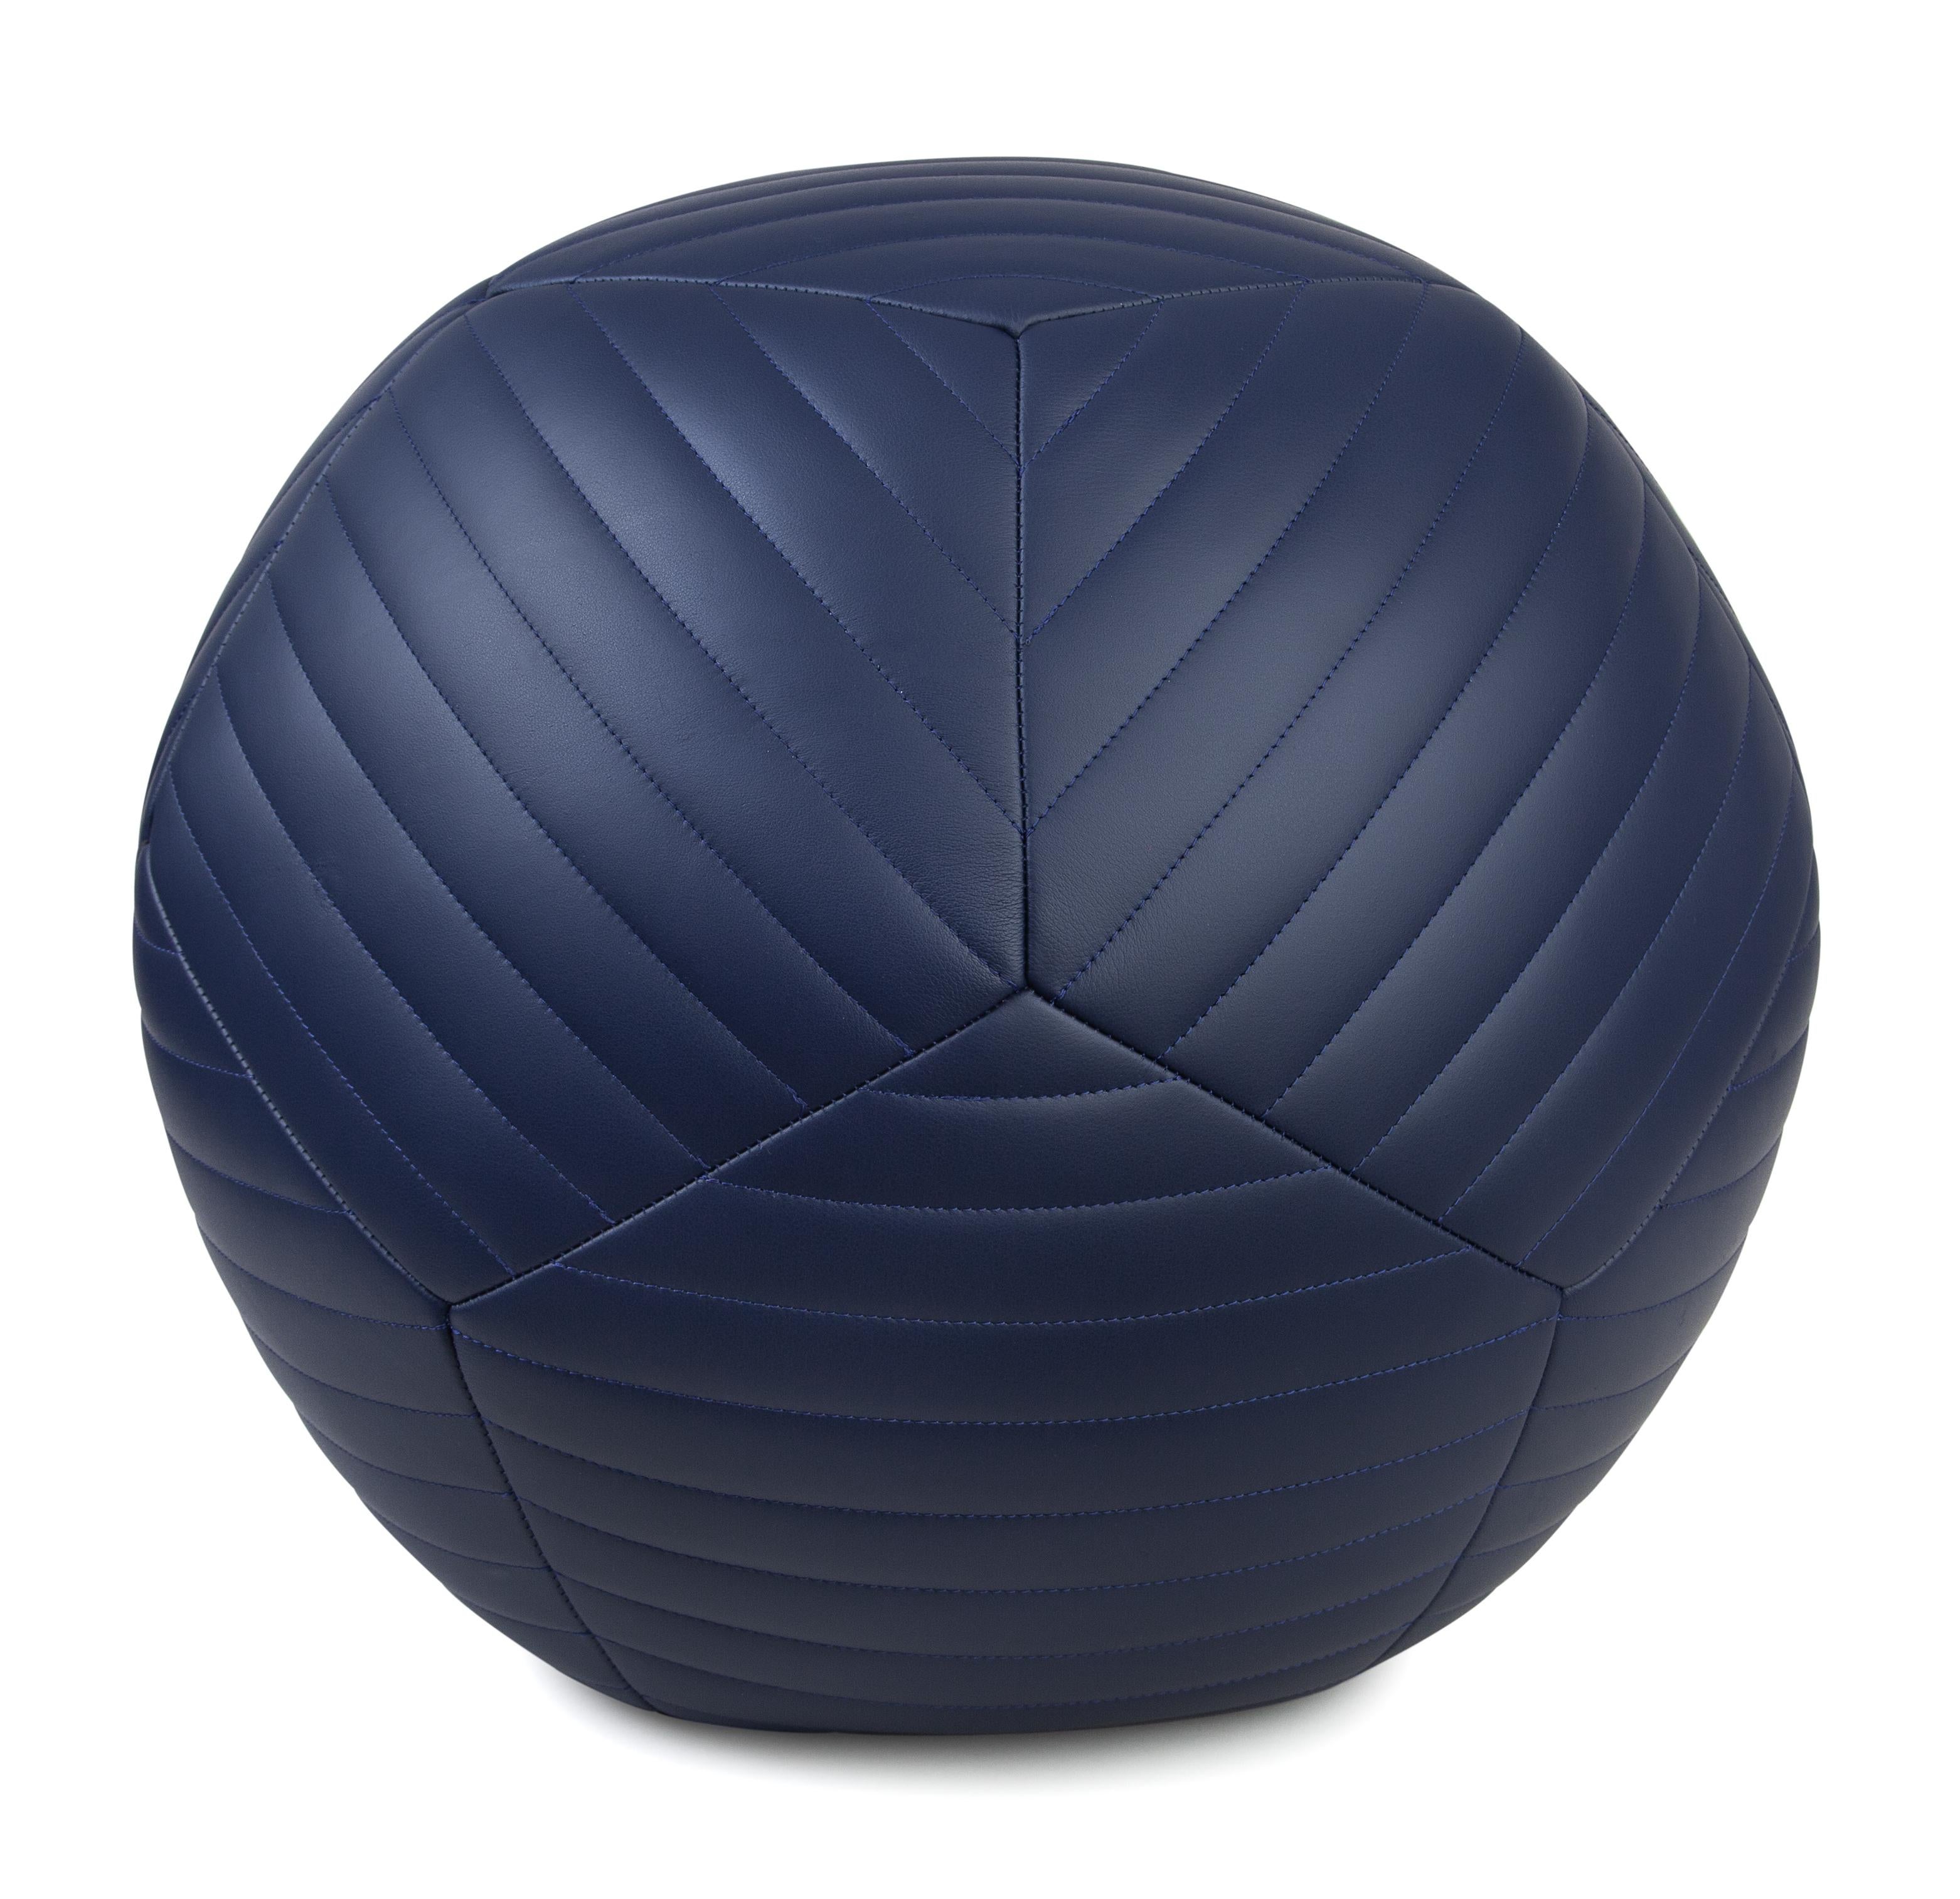 Featured with banded detailing, the Banded Ottoman is inspired by fundamental geometry. These structured and supportive round ball ottomans are designed to function as a traditional leg rest, add a twist to secondary living room seating, or as